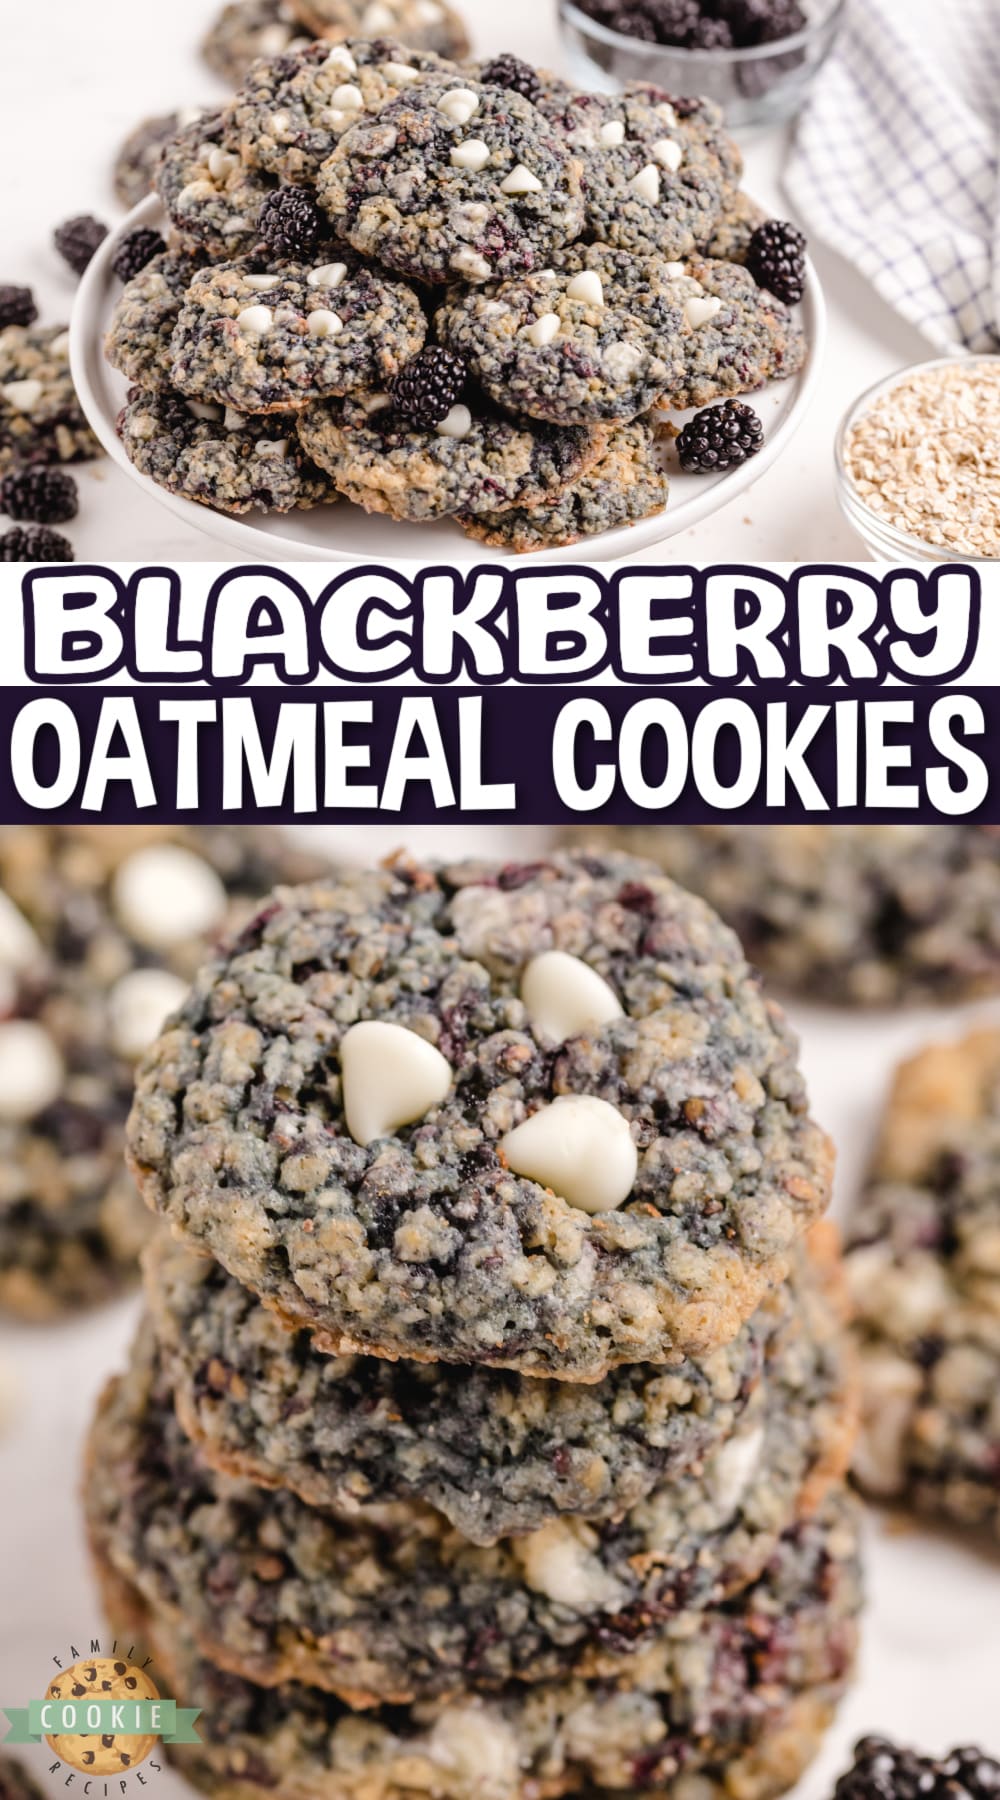 Blackberry Oatmeal Cookies are made by adding blackberries to a deliciously soft and chewy oatmeal cookie recipe. 